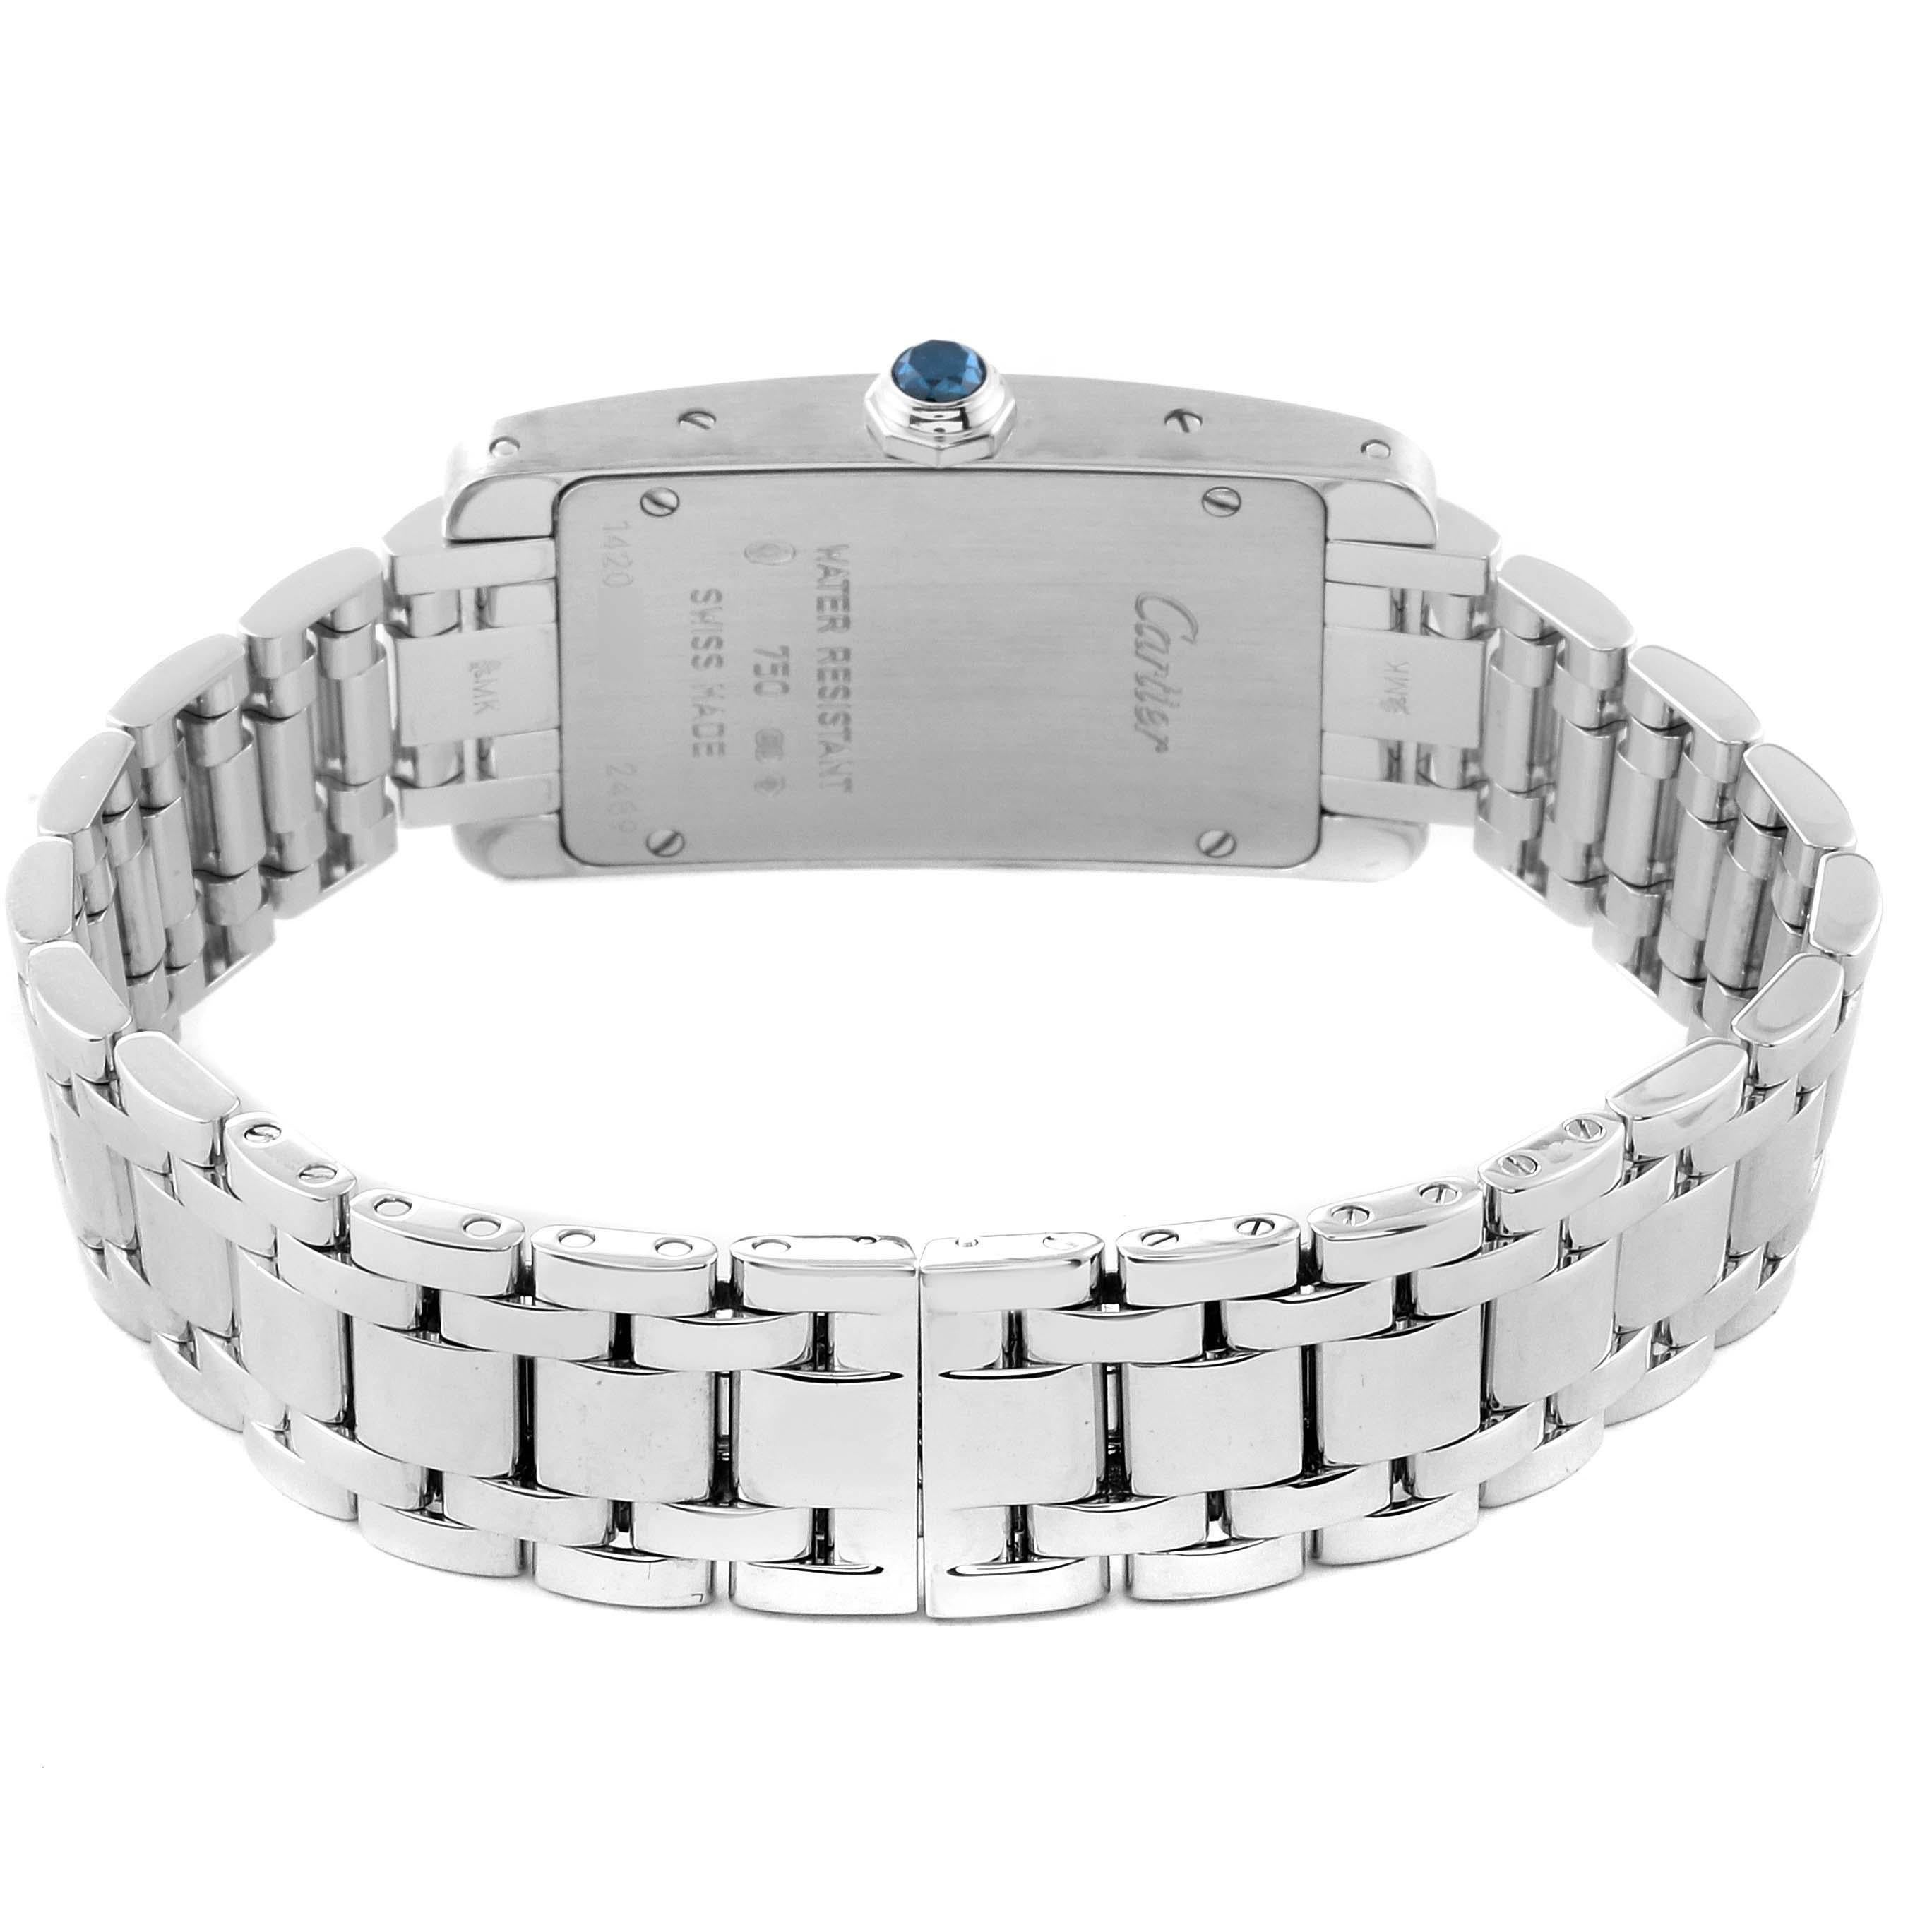 Cartier Tank Americaine Silver Dial White Gold Ladies Watch W26019L1 Box Papers. Quartz movement. 18K white gold case 19.0 x 35.0 mm. Octogonal crown set with faceted blue sapphire. . Scratch resistant sapphire crystal. Silver dial with black Roman